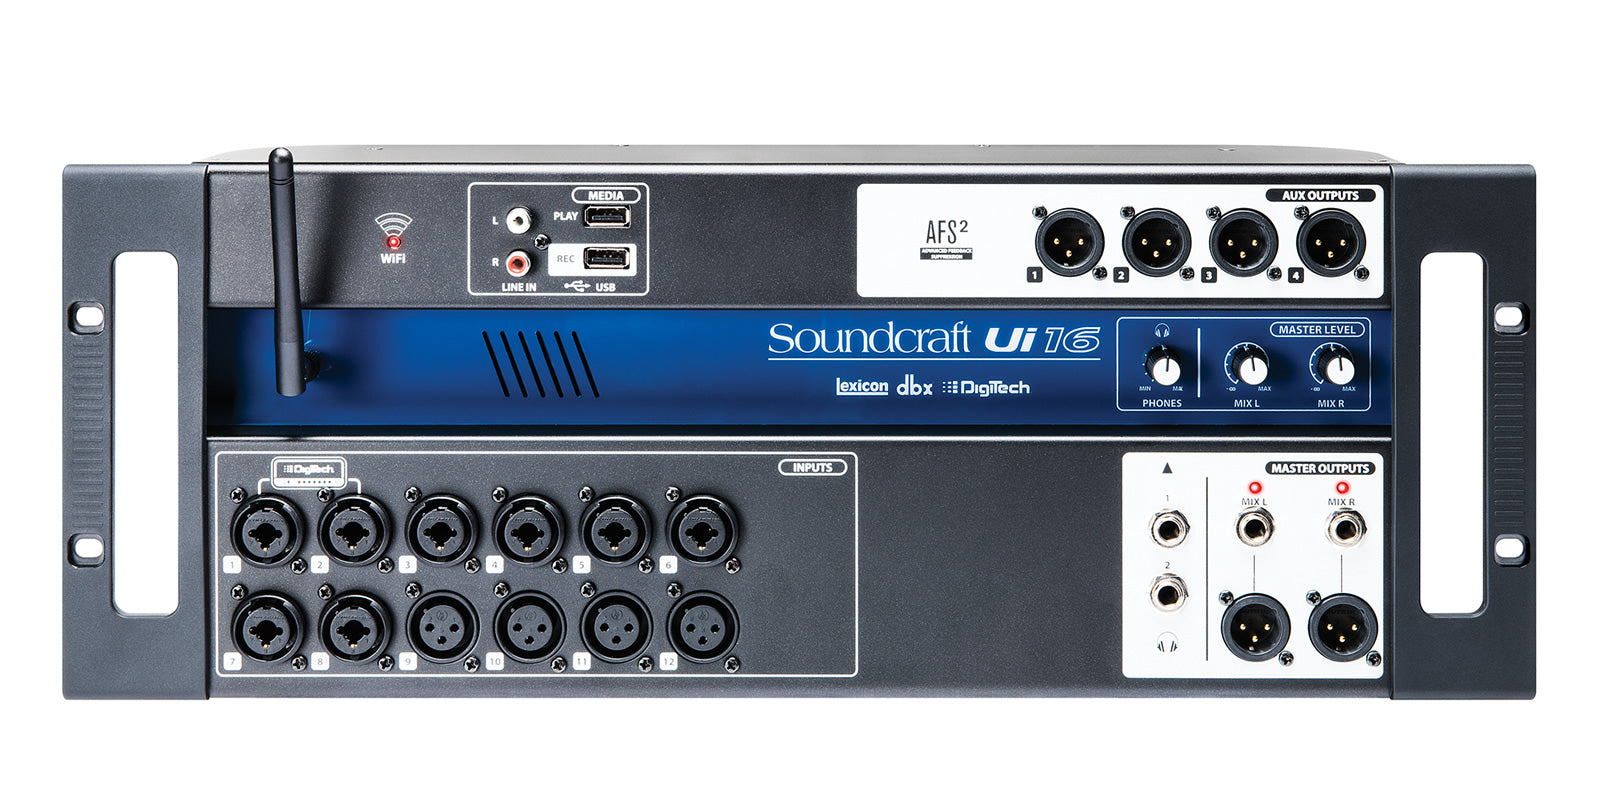 Soundcraft Ui16 16-channel Digital Mixer With WIFI for Wireless Control